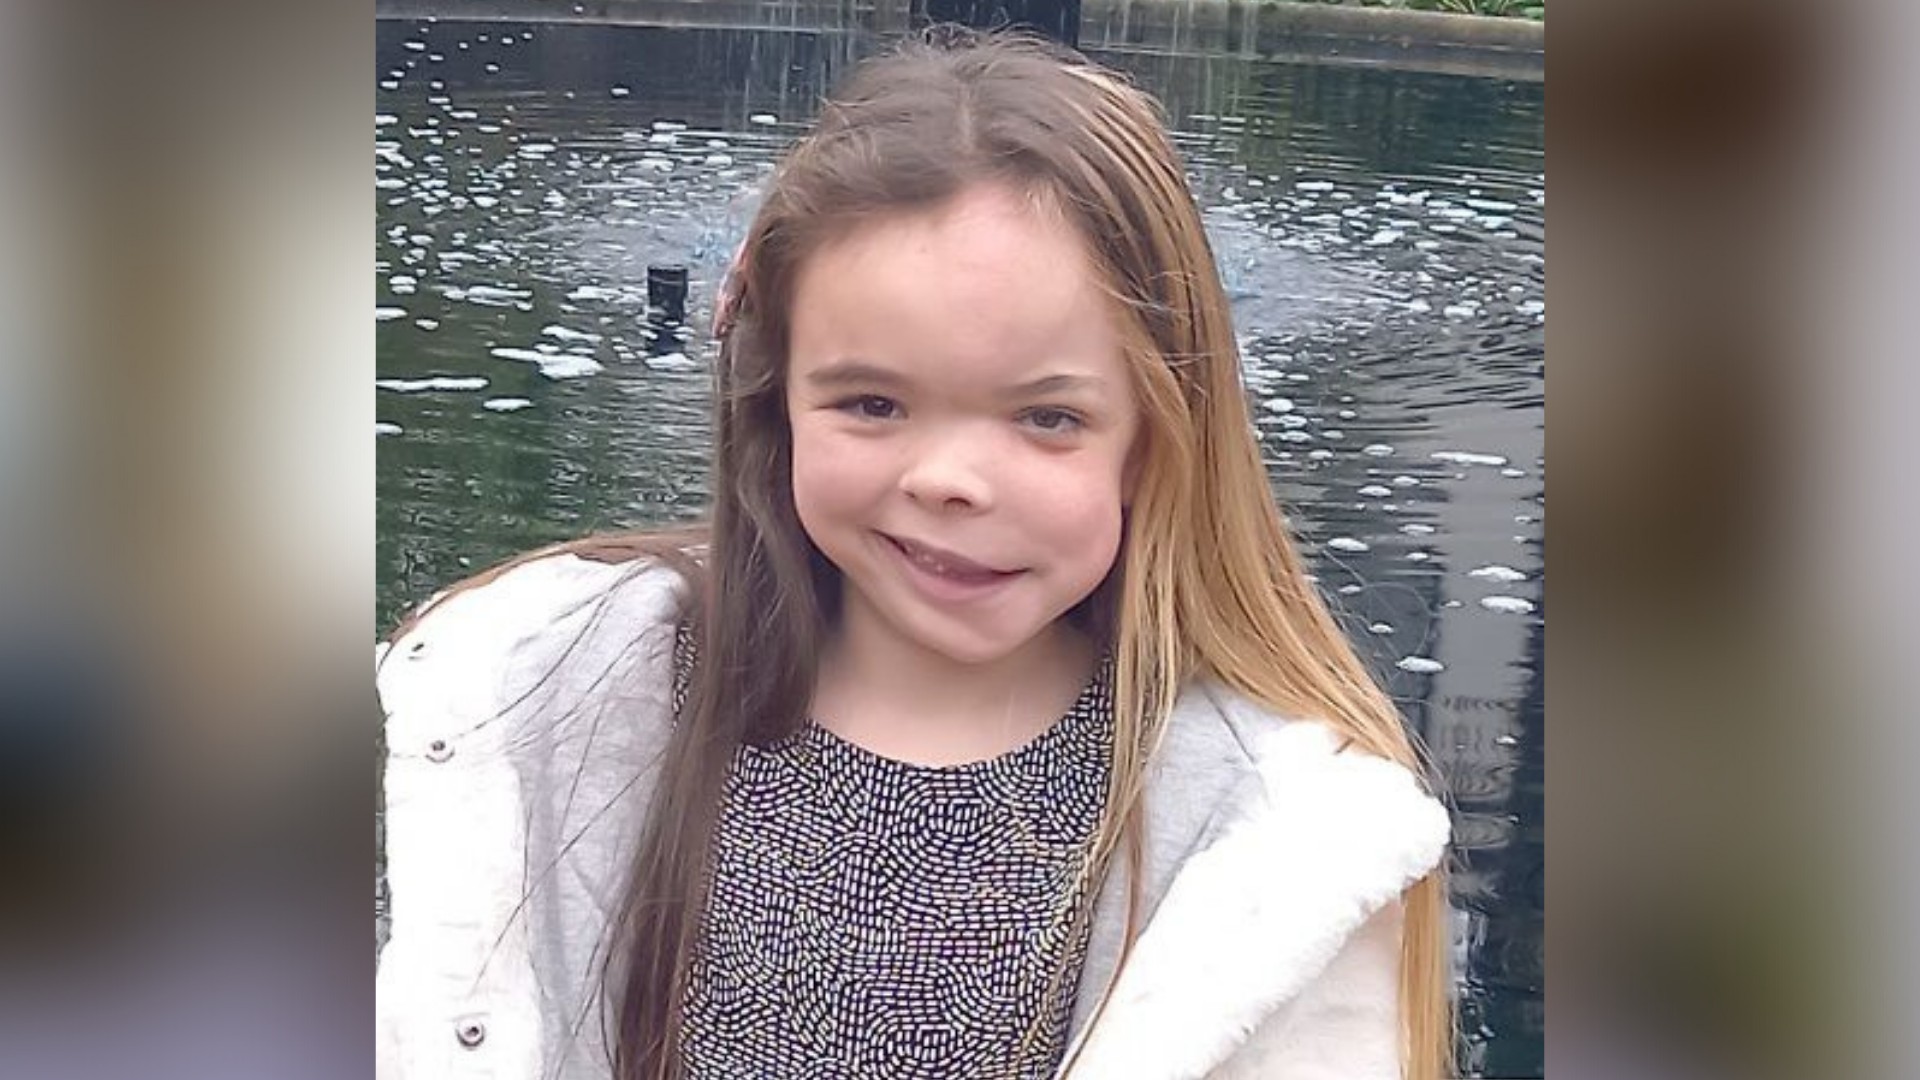 April, is seven years old and has blonde hair on the left side of her head, and brunette on the right. Her visible difference is seen through the bones in her left cheek and jaw bones, making the left side of her face appear larger. April smiles at the camera, she is stood in front of a pond and is wearing a fluffy white coat and black spotted dress.